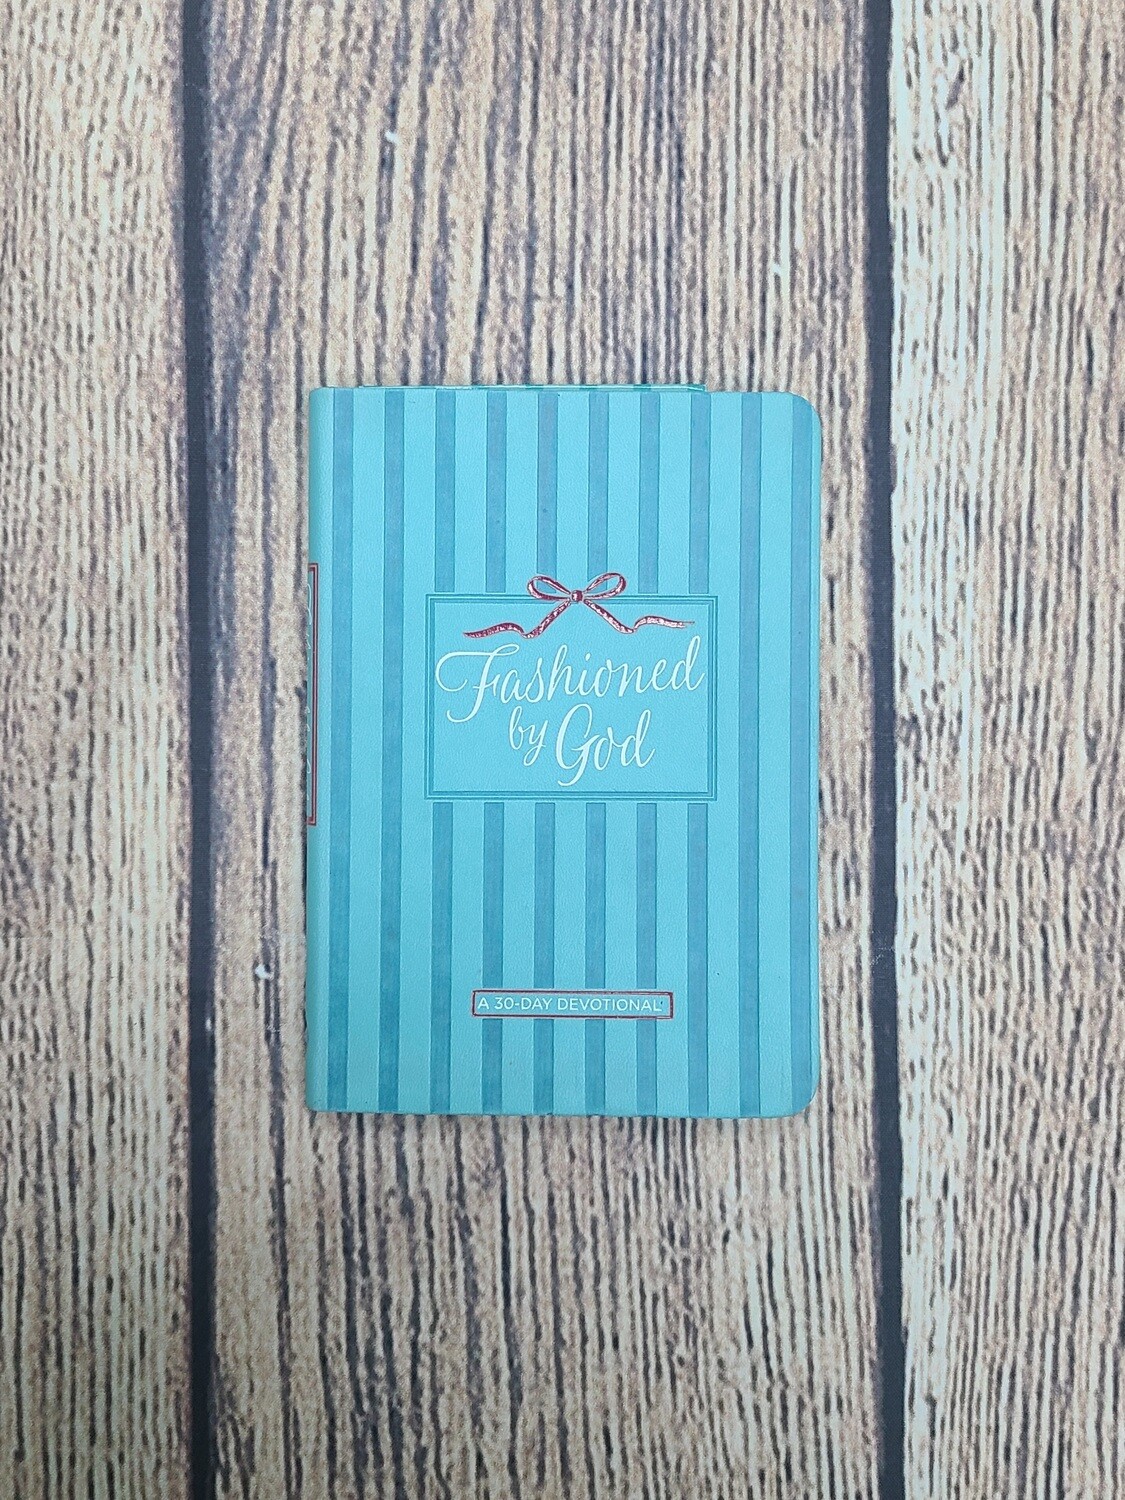 Fashioned by God: A 30-Day Devotional by Kathryn Graves - Leatherbound - New